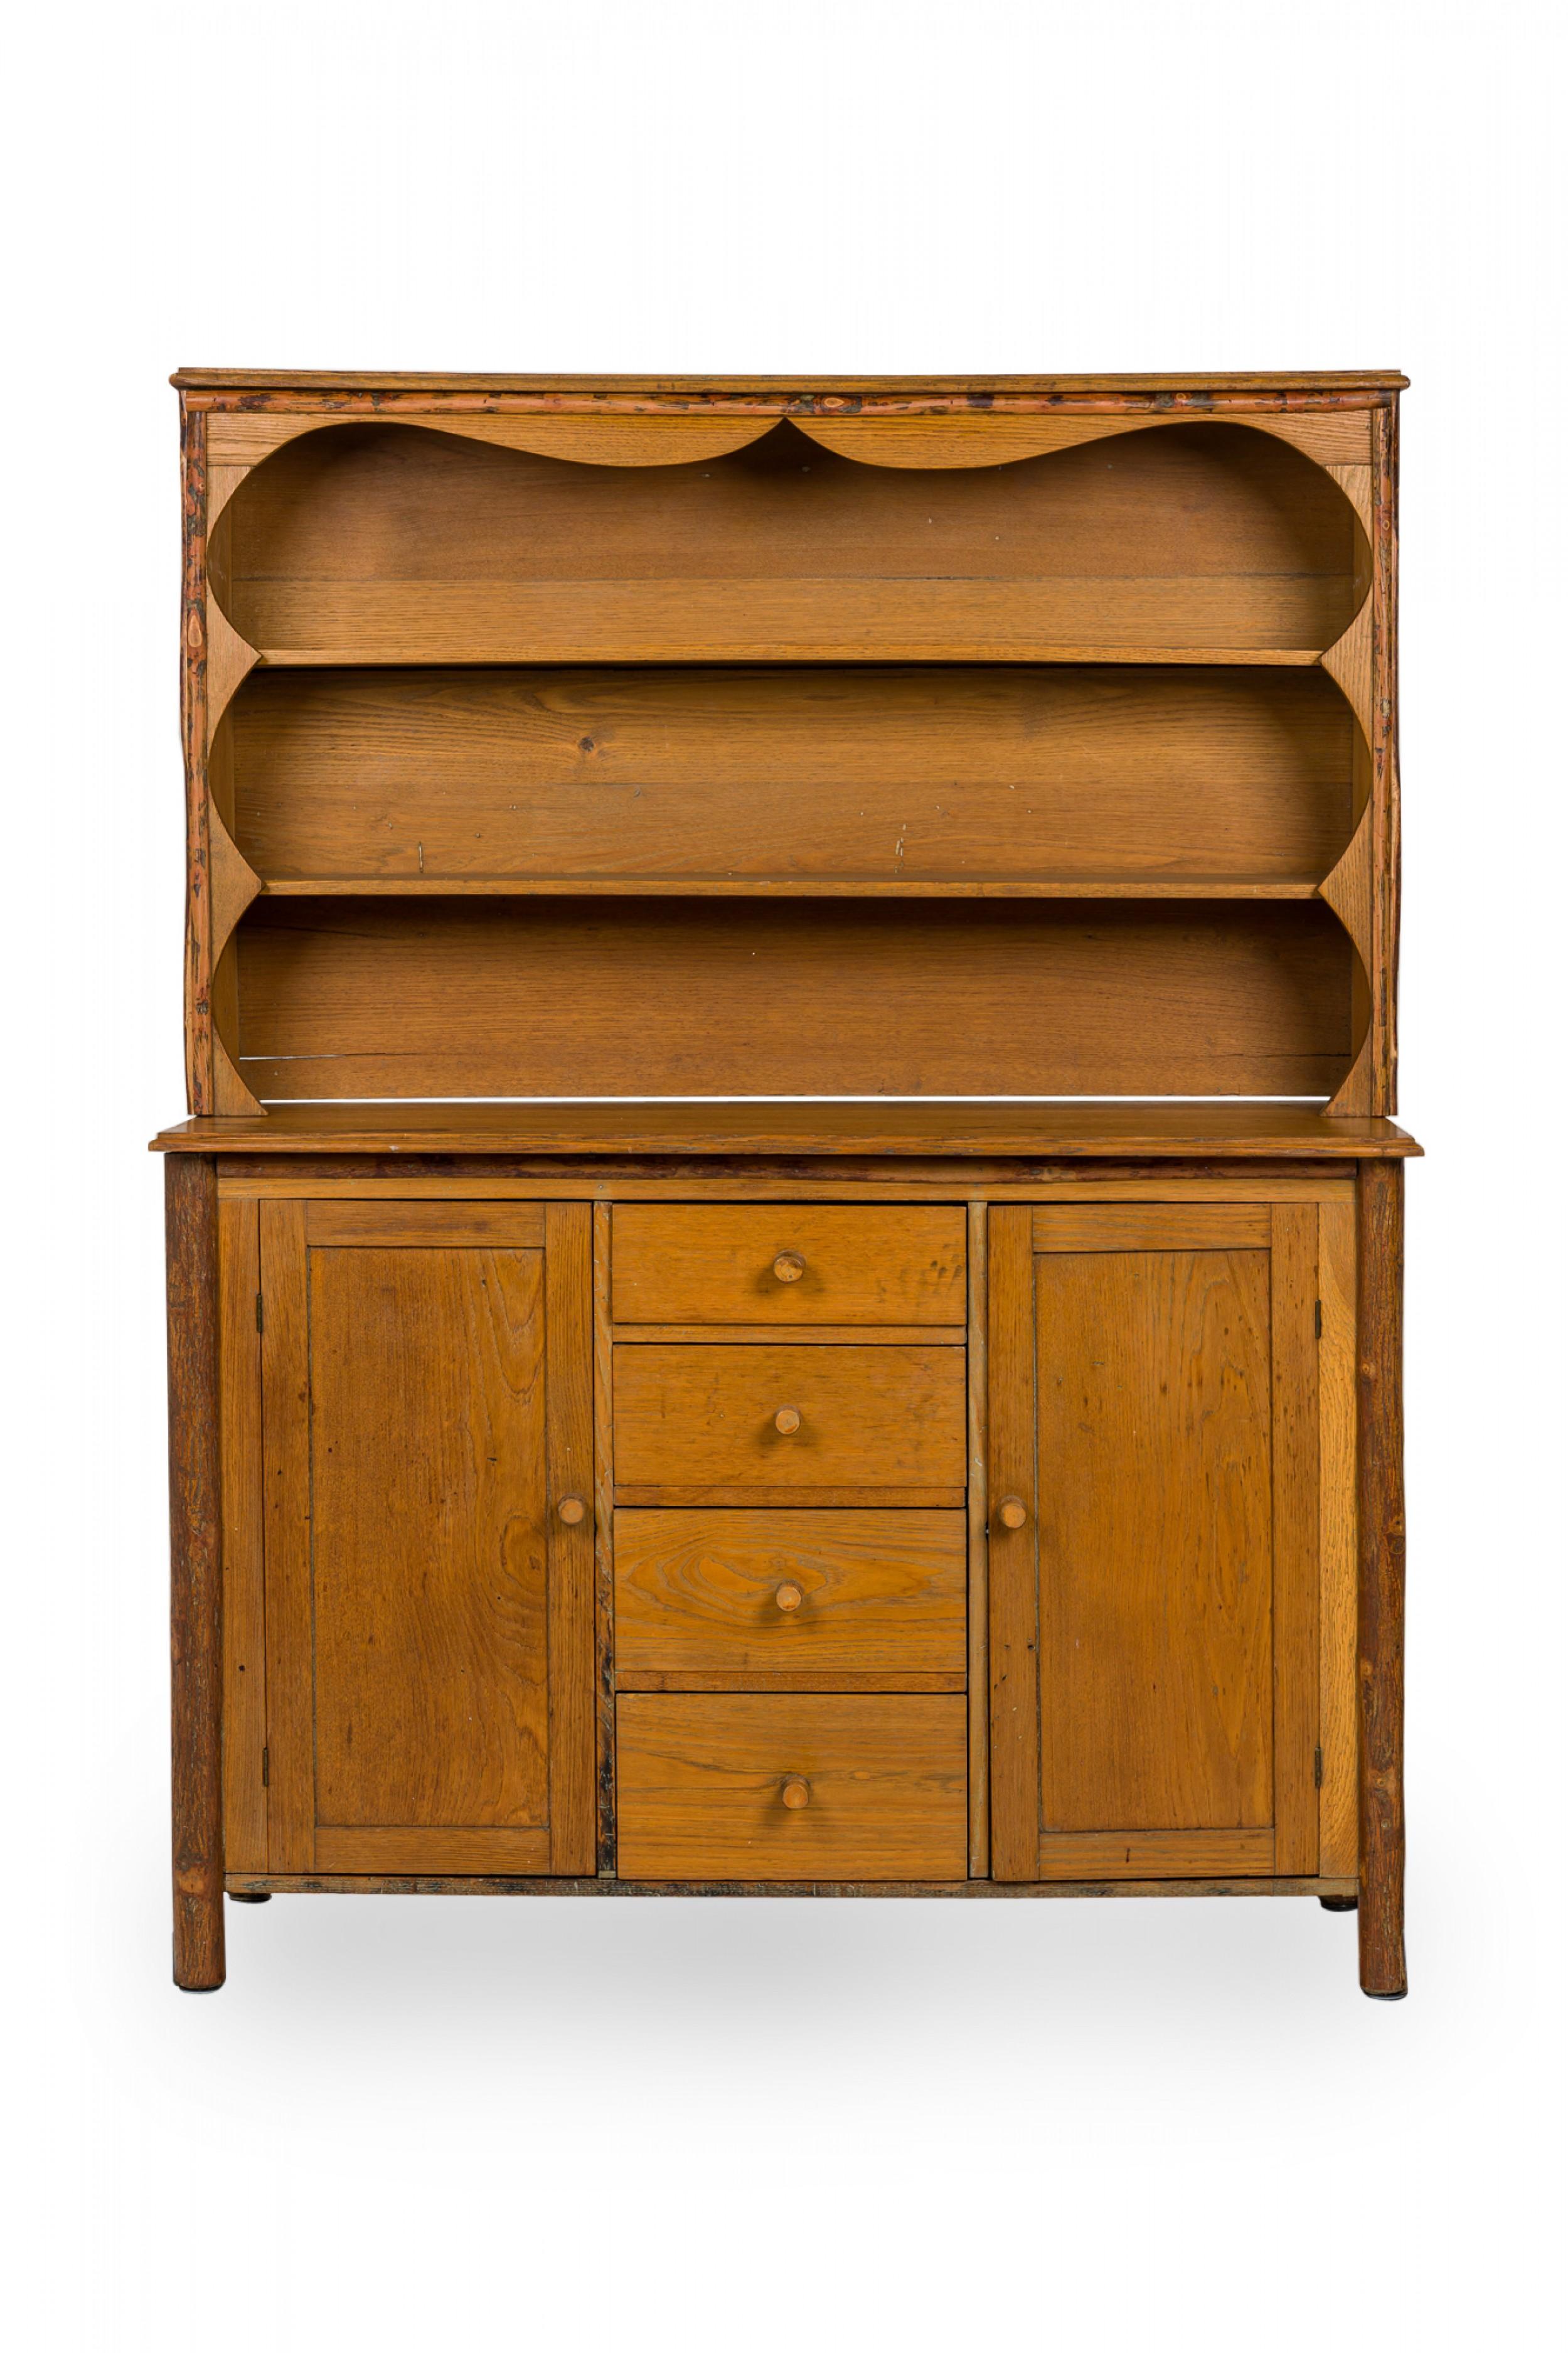 Rustic Old Hickory (mid-20th century) two-piece oak kitchen hutch with an open two-shelf upper section resting on a lower cabinet base with four central drawers flanked by two doors, all with turned wooden knob drawer handles and resting on four